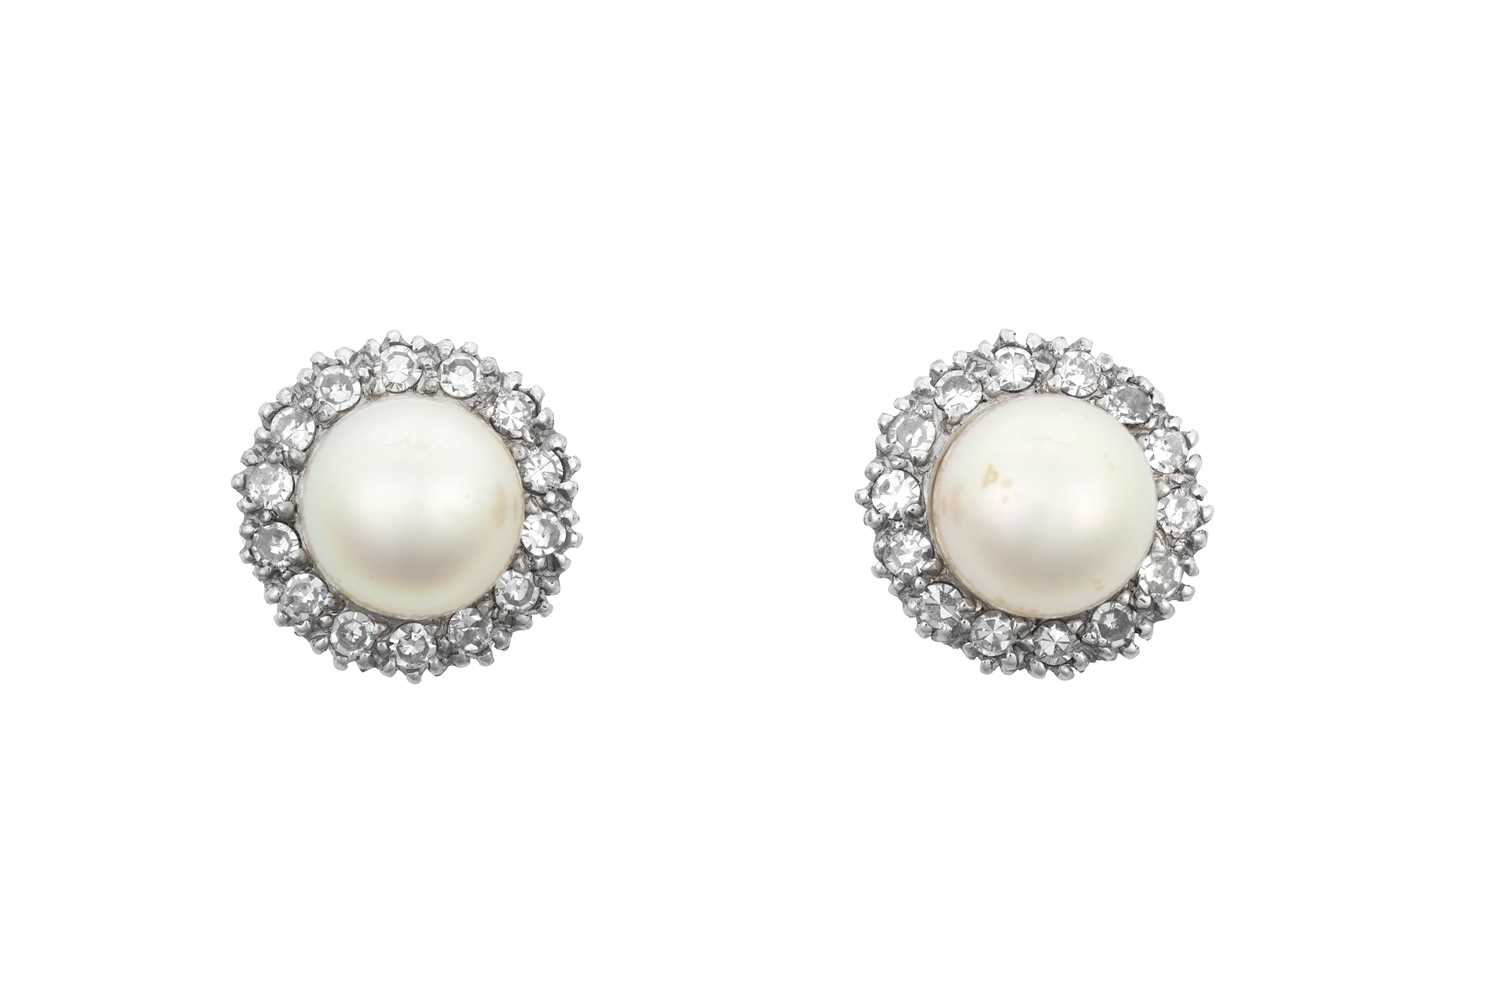 A Pair of Cultured Pearl and Diamond Cluster Earrings the cultured pearls within borders of eight-